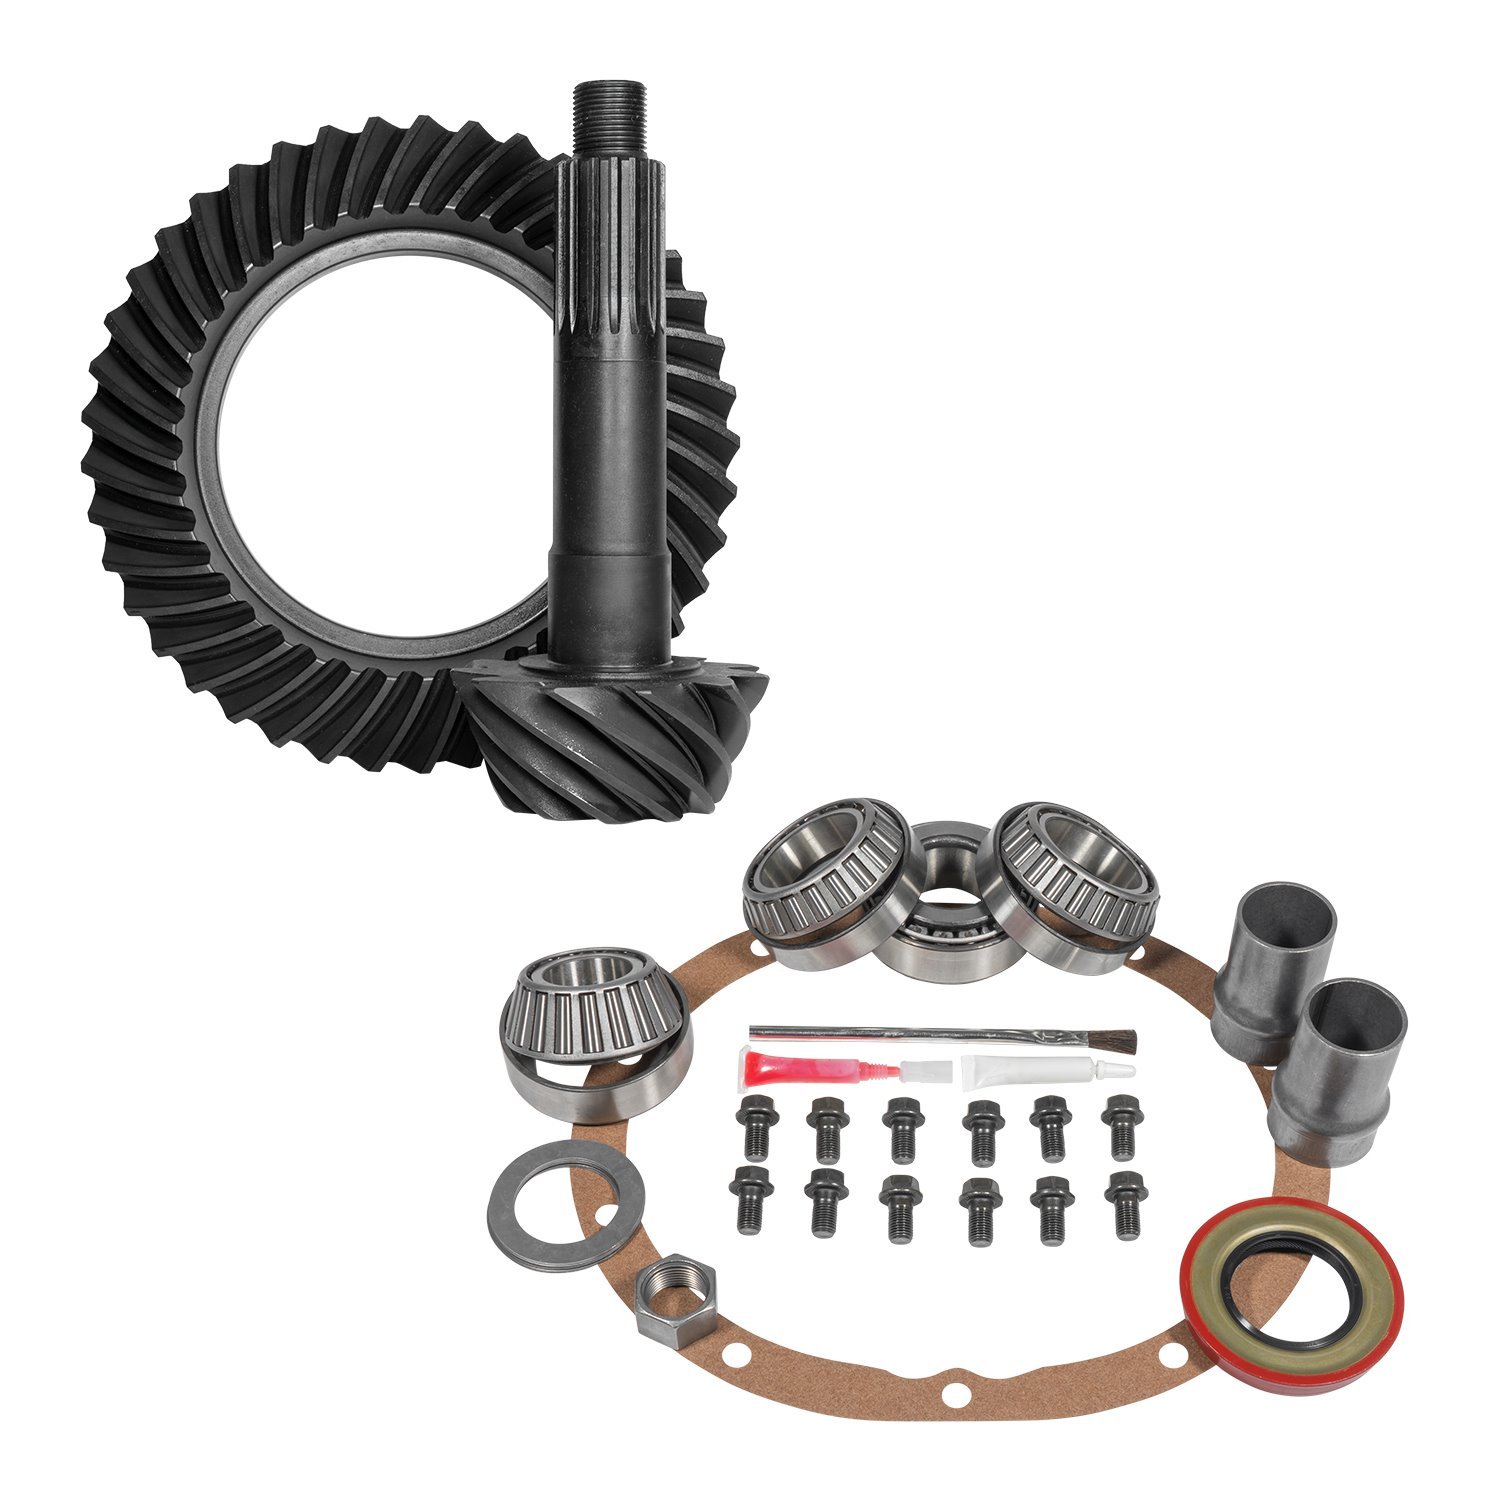 Muscle Car Re-Gear Kit For GM 55P Differential, 17 Spline, 3.08 Ratio